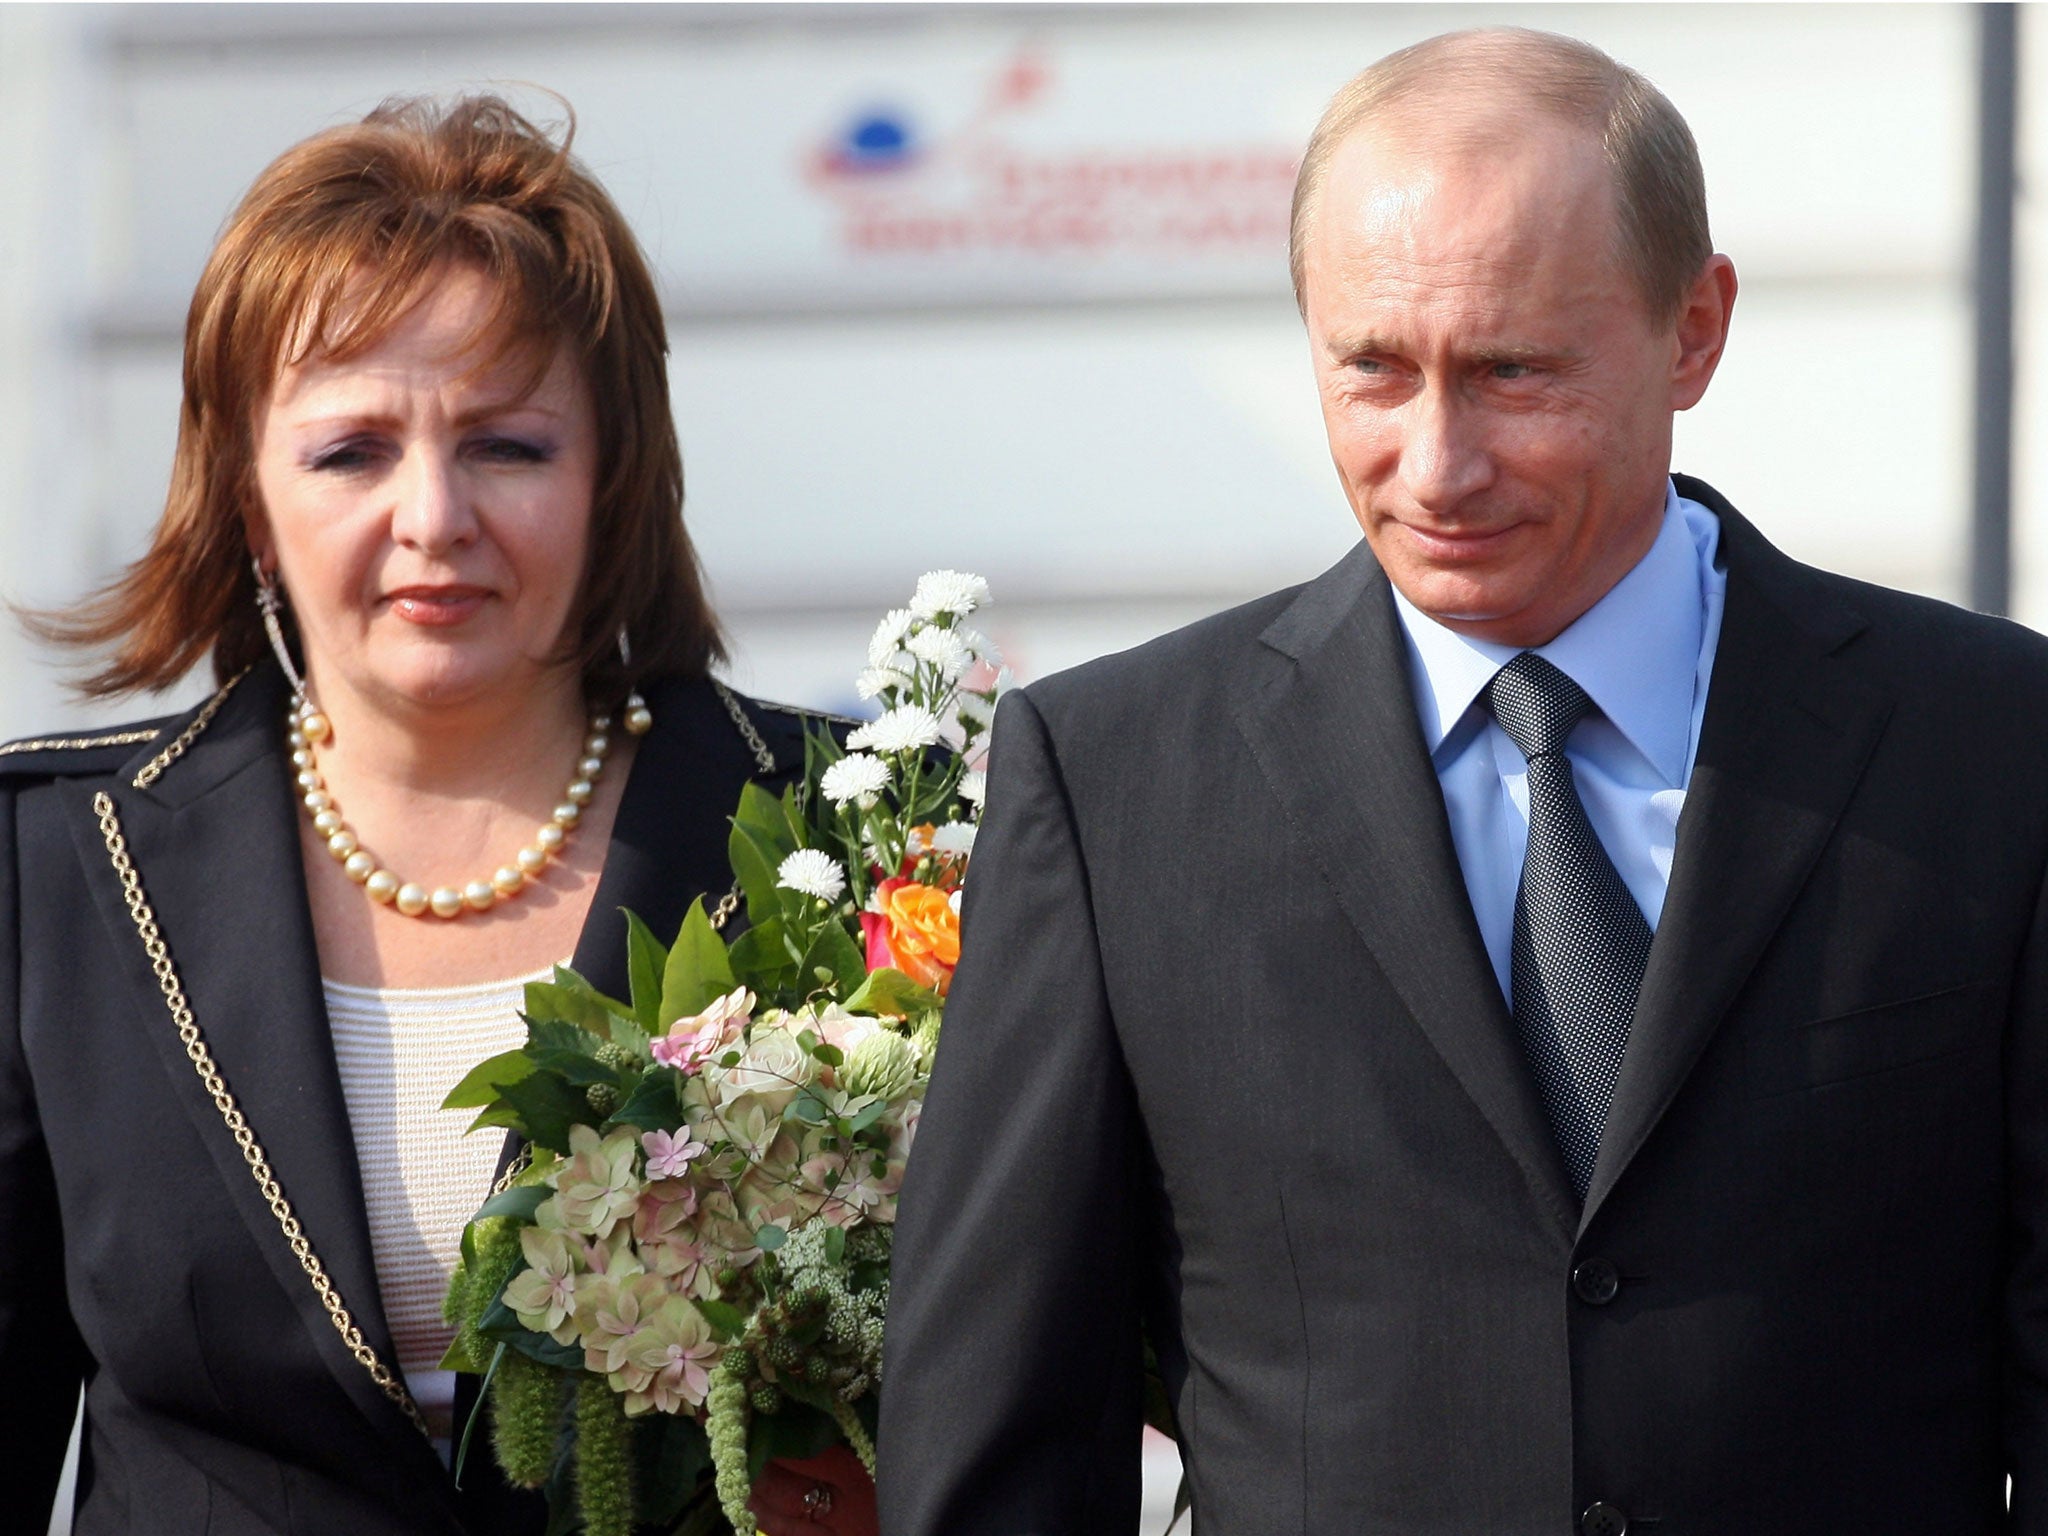 Vladimir Putin finalises divorce from wife Lyudmila after 30 years of marriage The Independent The Independent pic